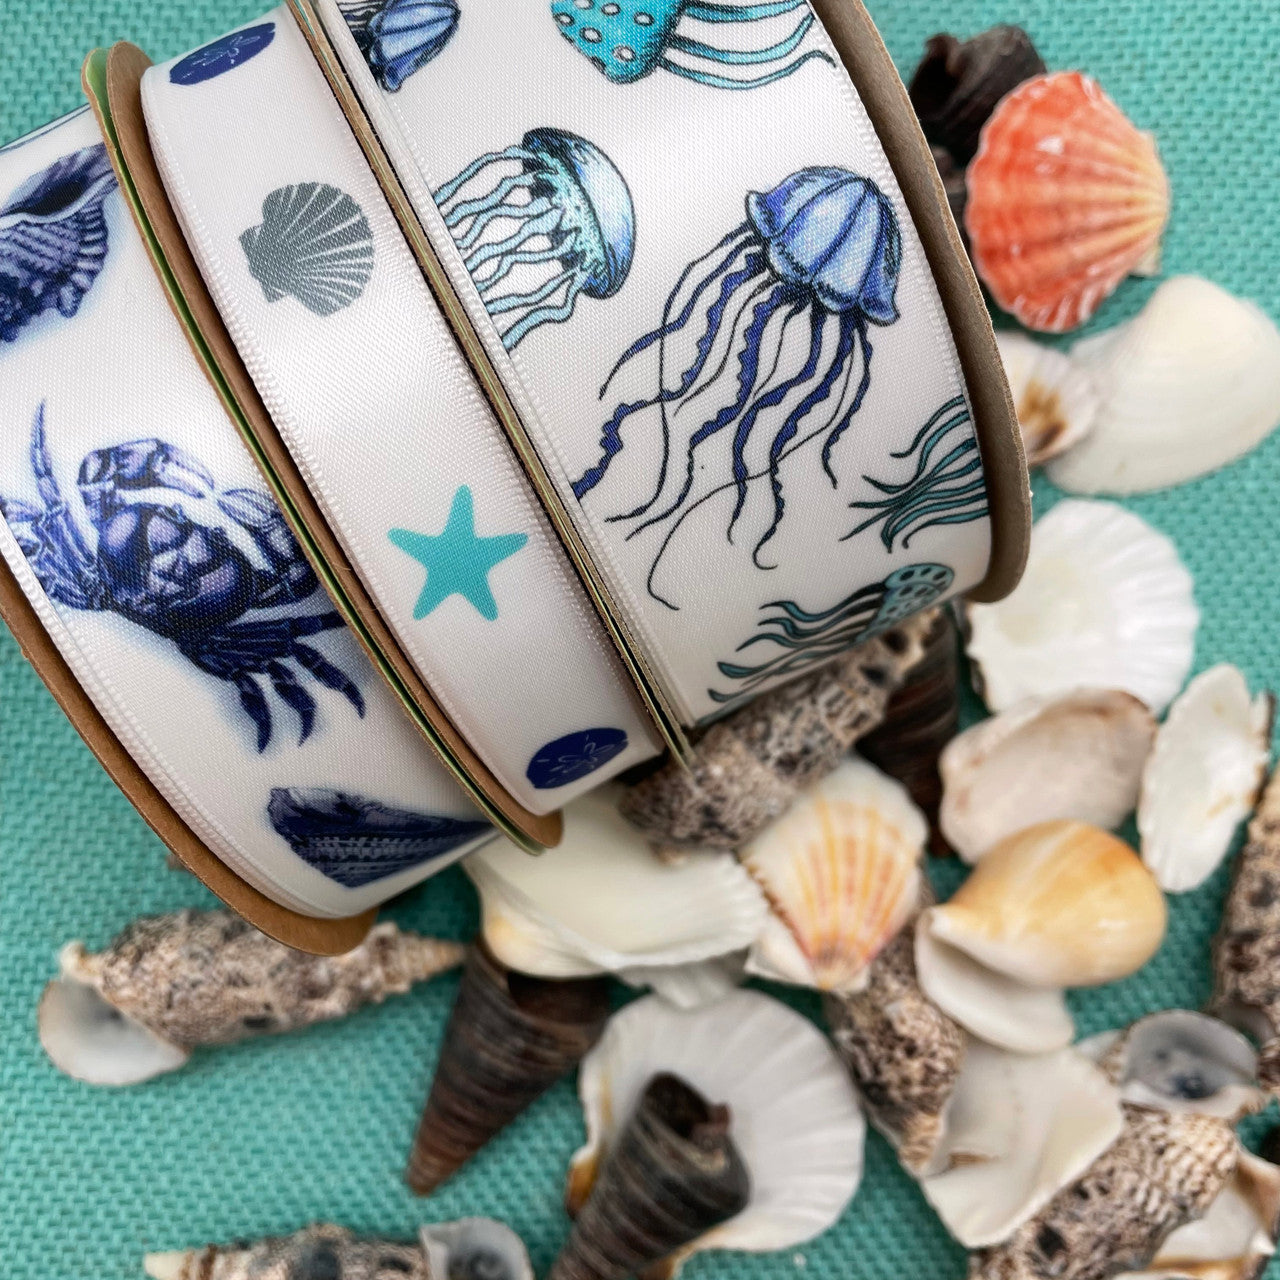 Combining our blue beach, ocean and seafaring themed ribbons of sea creatures, jelly fish and seashells in all different widths will create a beautiful beach themed party decor! 